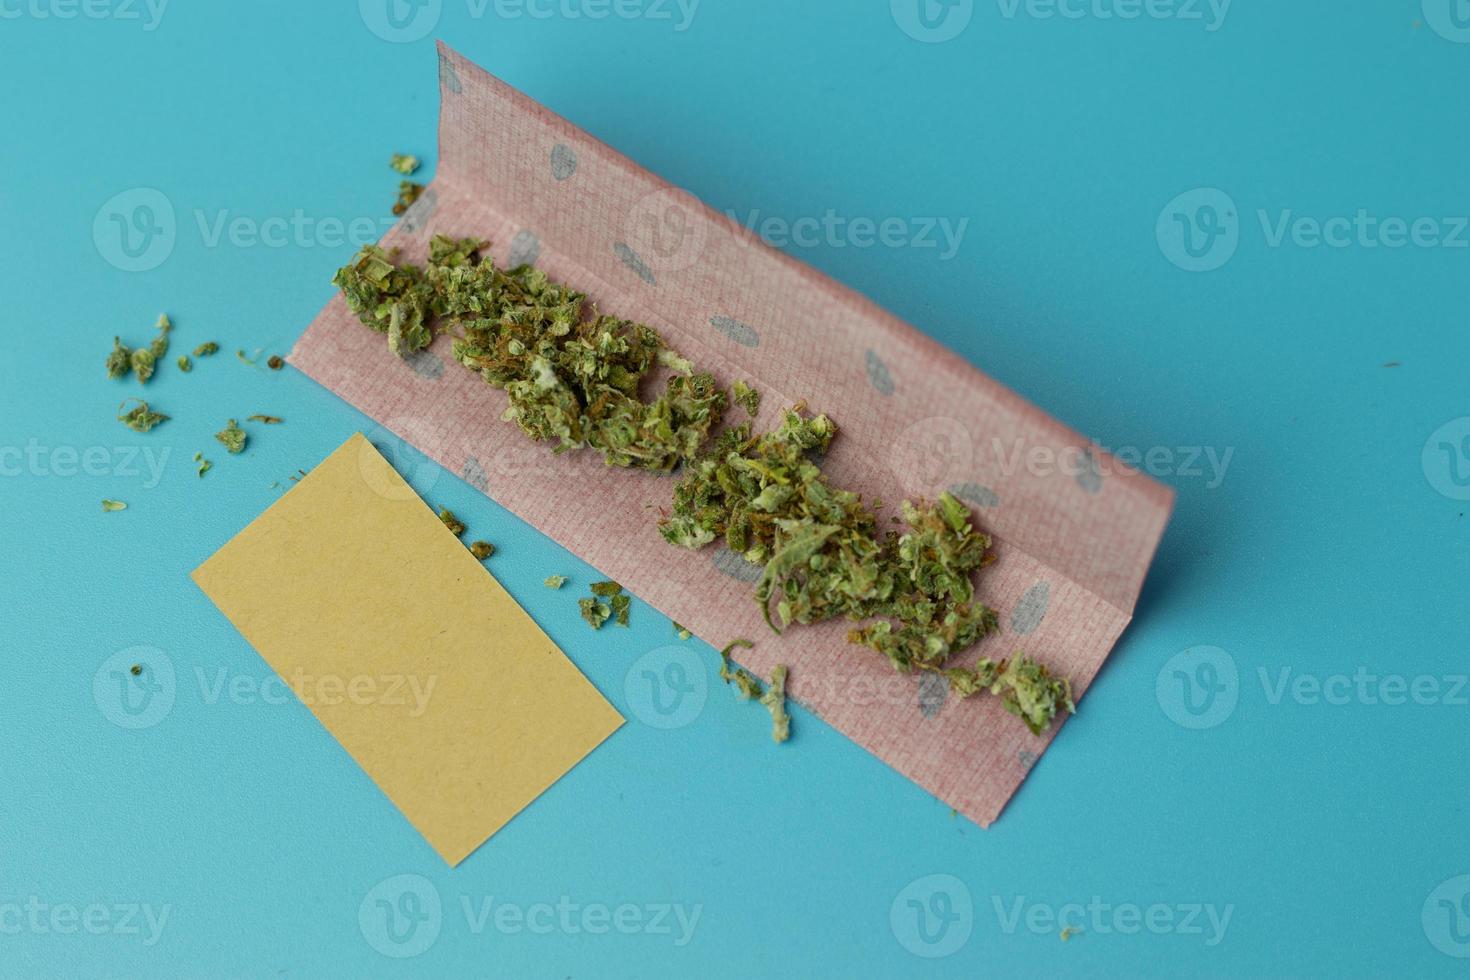 Joint paper for cannabis roll on blue background top view, marijuana smoking accessory photo